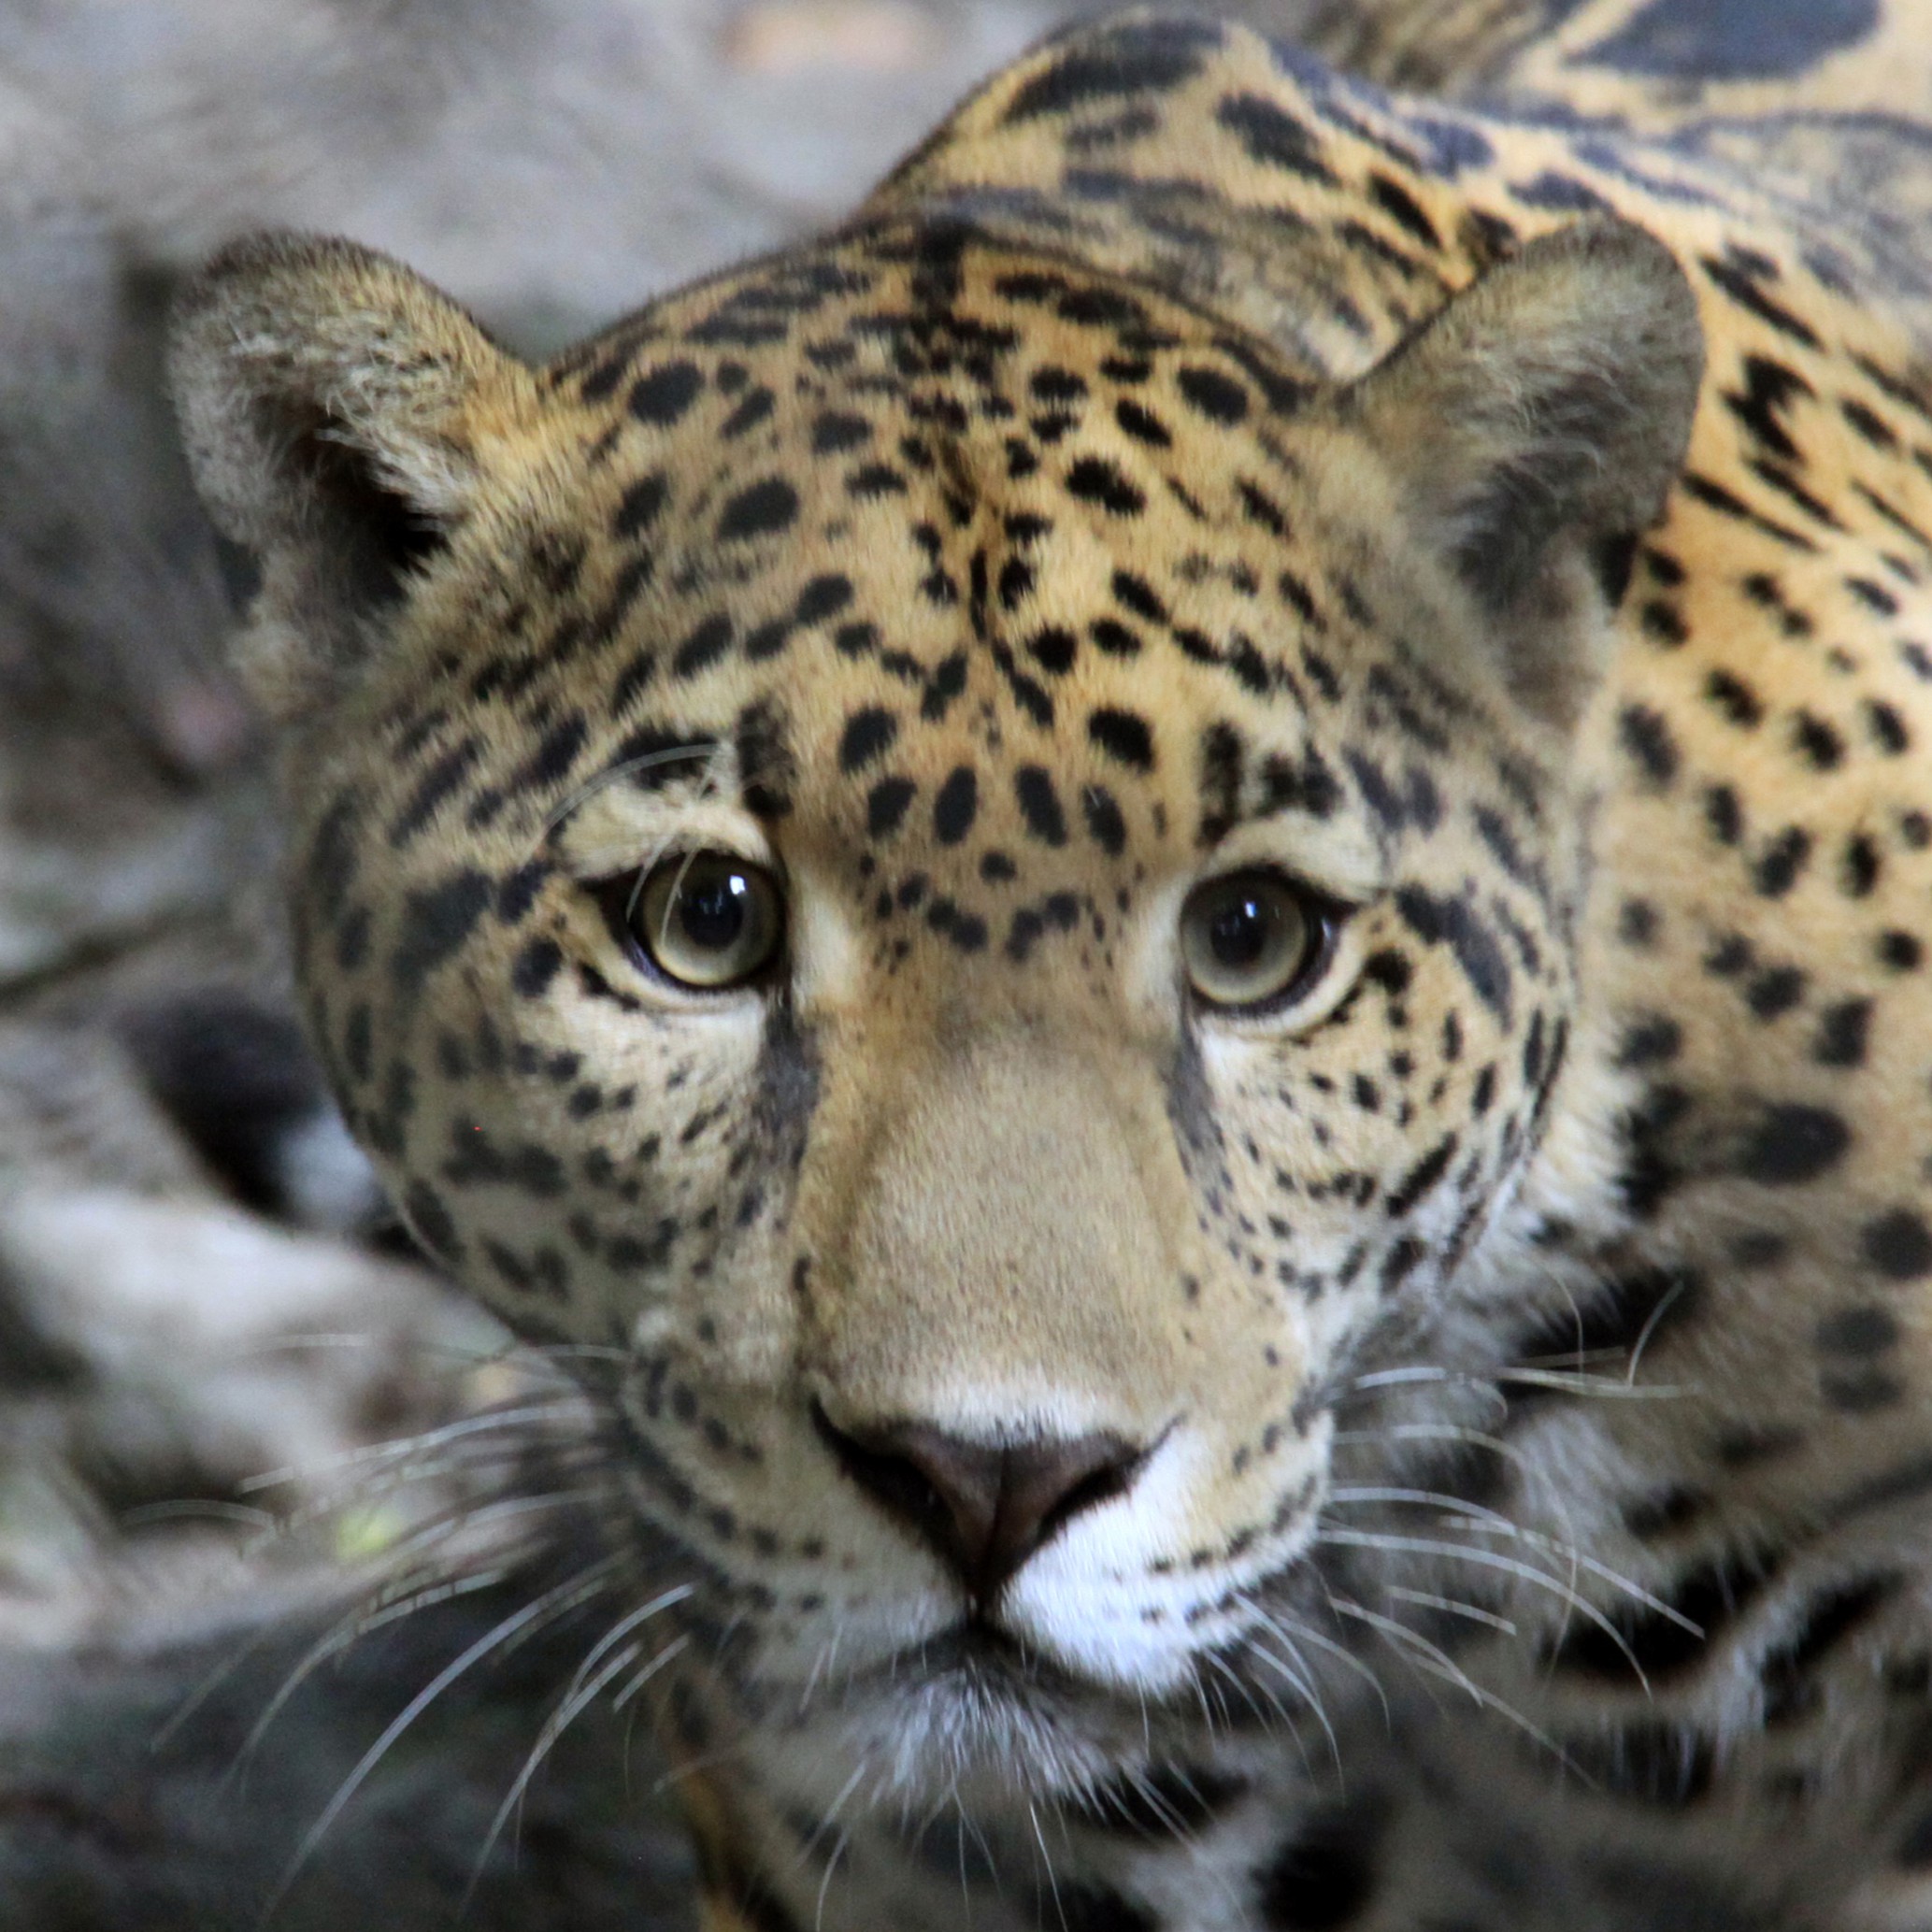 The jaguar is the largest cat in the Americas.